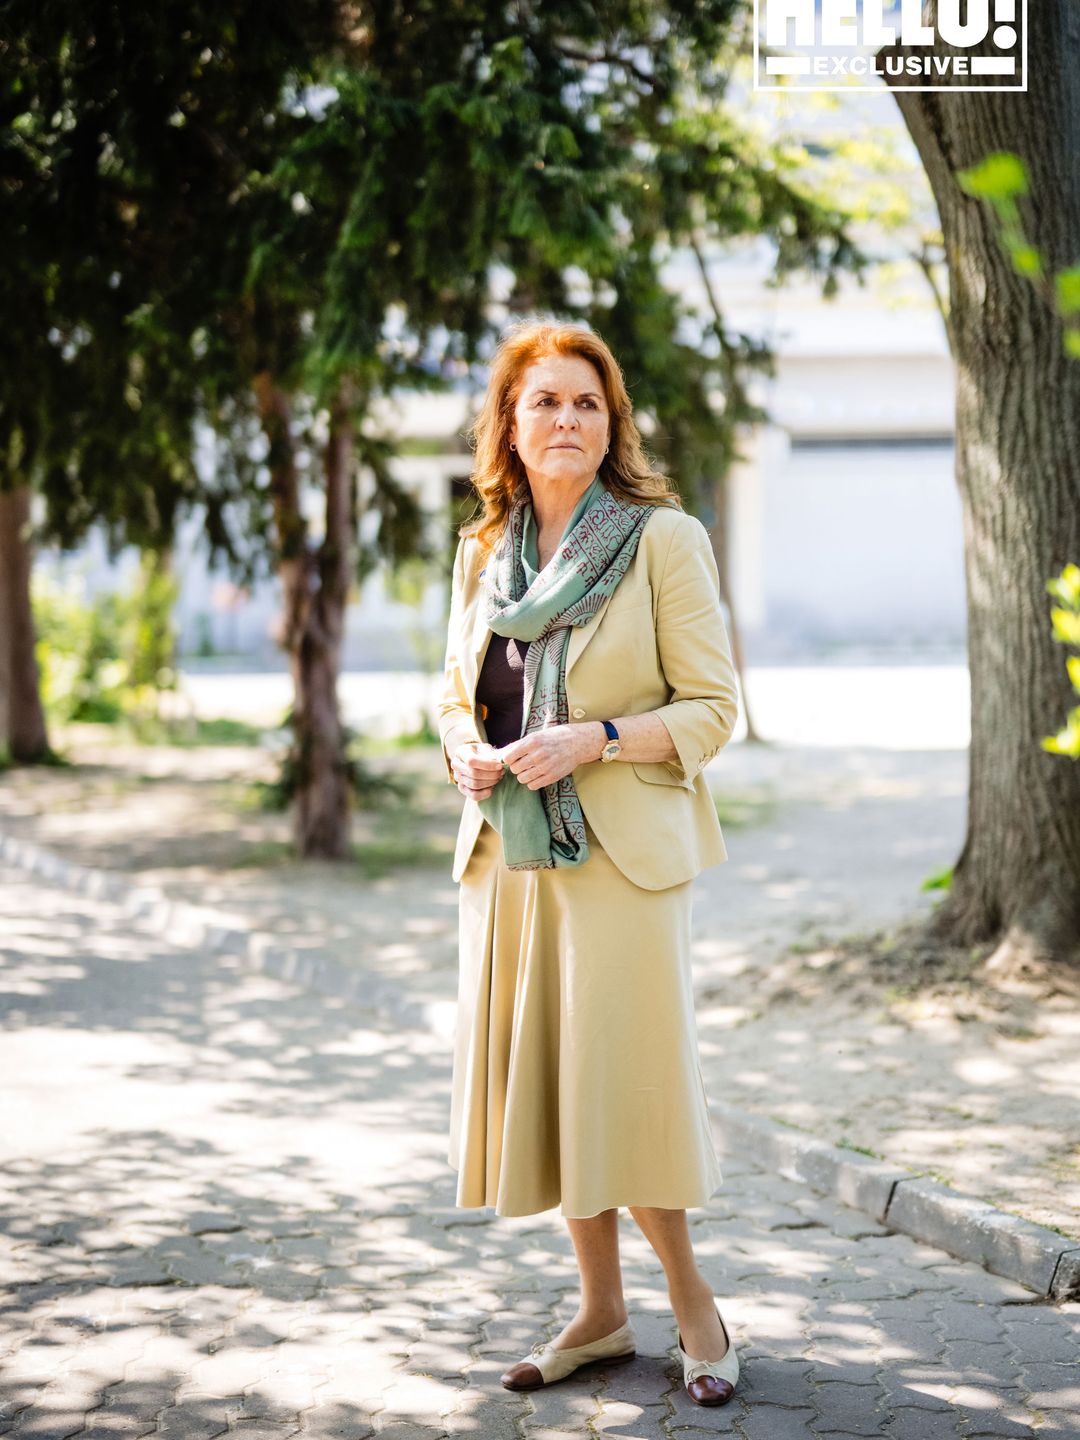 Sarah, Duchess of York wearing yellow trouser suit and scarf posing outside Tikva orphanage in Romania 